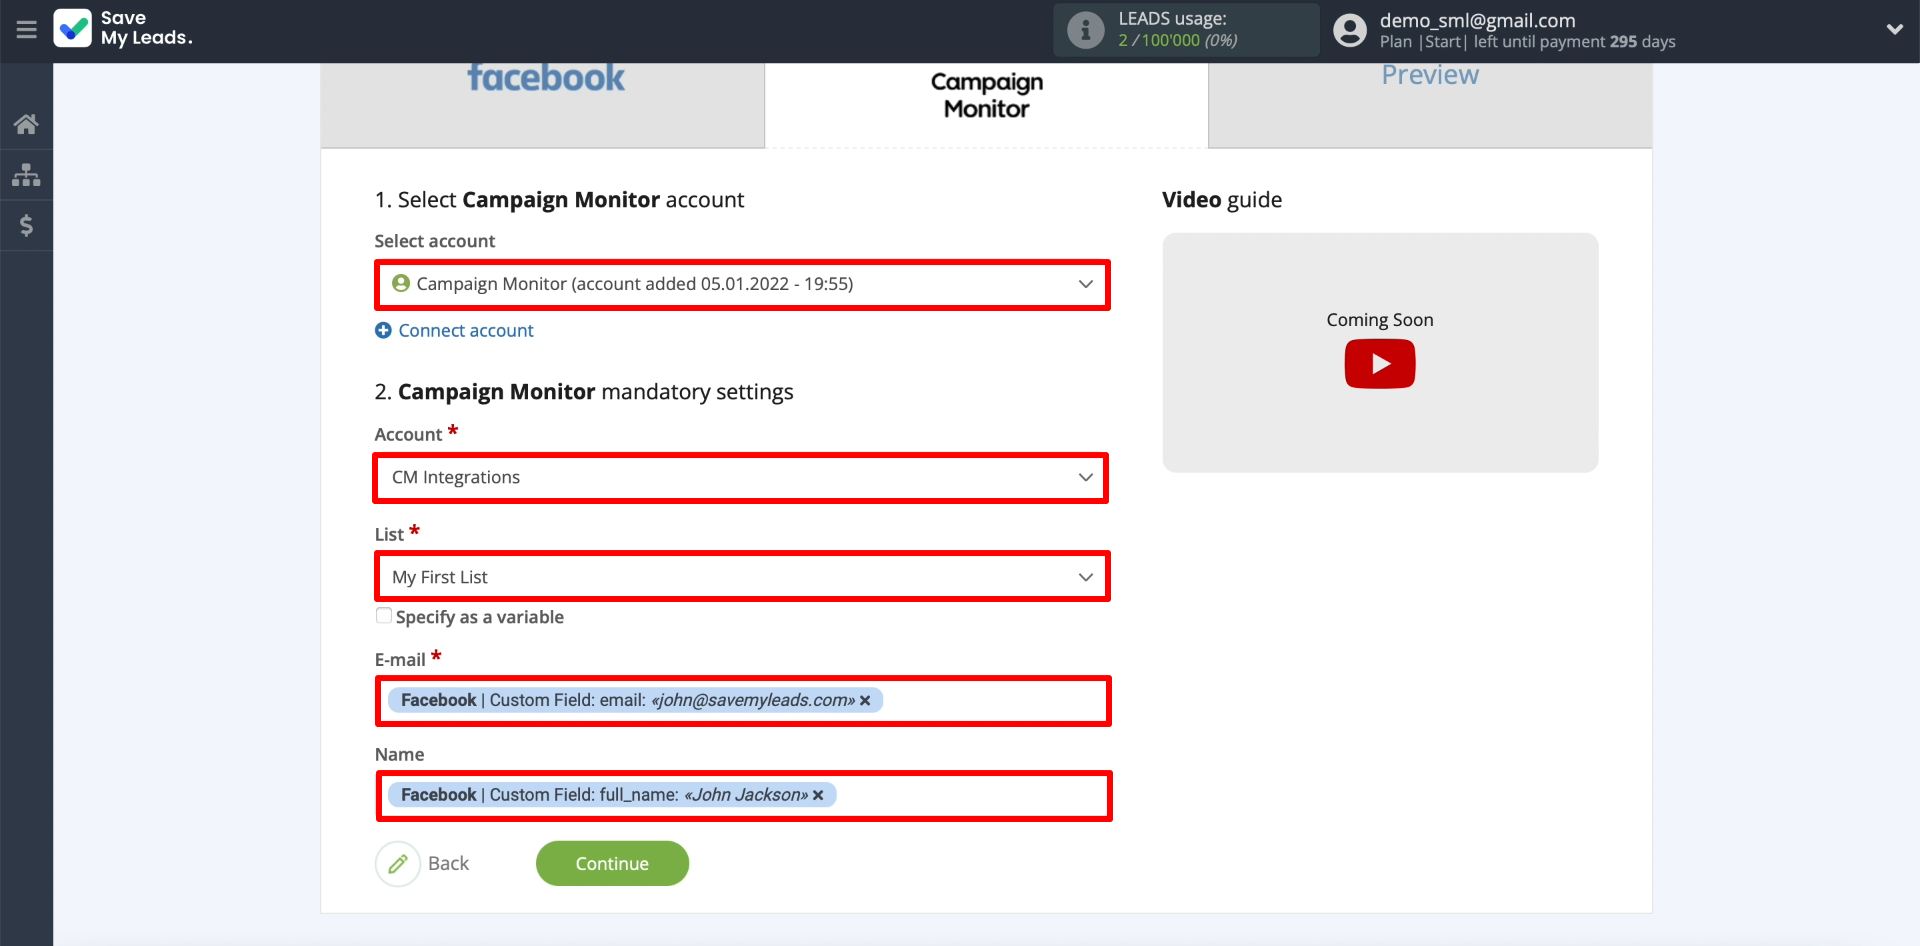 Facebook and Campaign Monitor integration | Setting up uploaded data